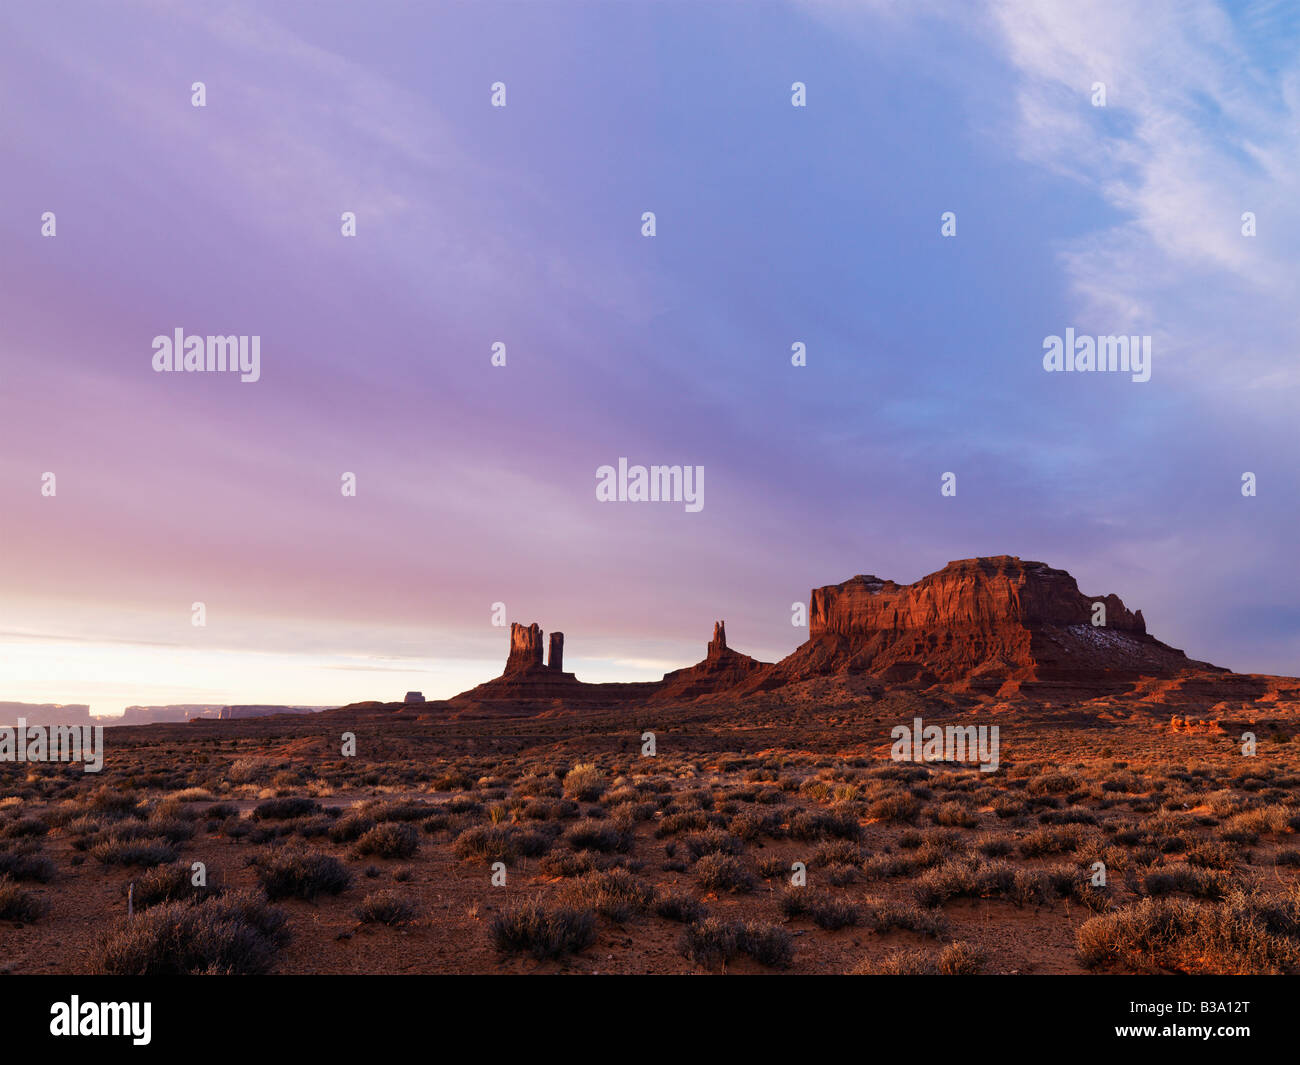 Scenic landscape at dusk of mesas in Monument Valley near the border of Arizona and Utah United States Stock Photo